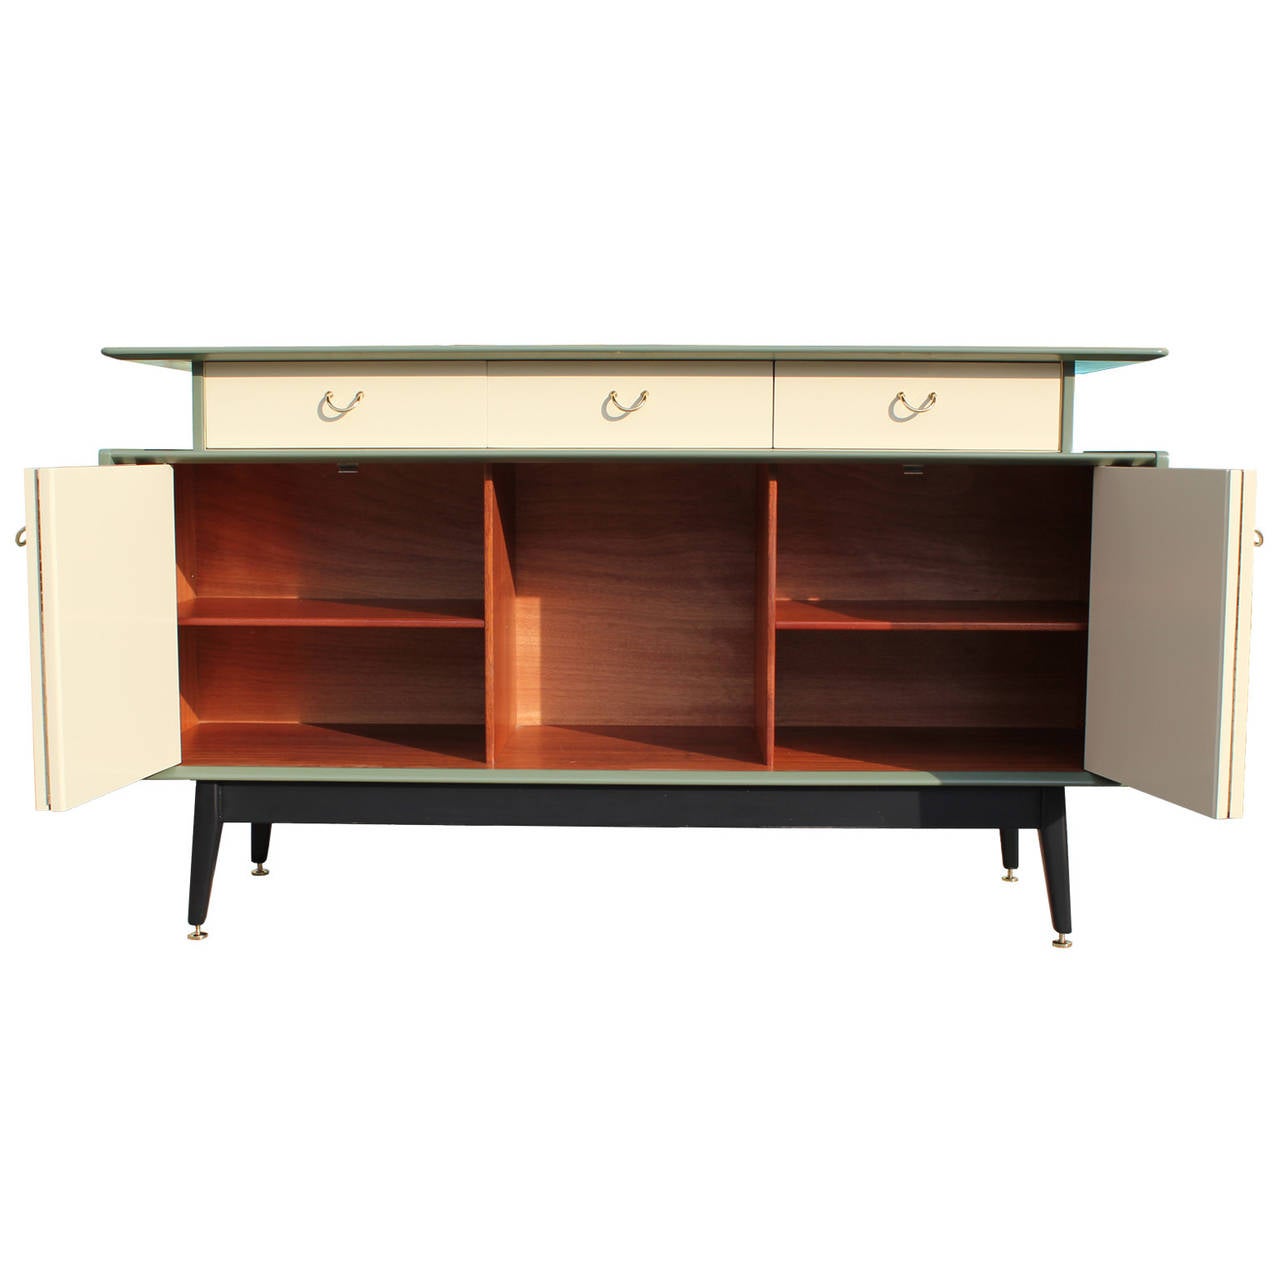 Stunning sideboard refinished in tone on tone green lacquer with brass levelers, piping, and handles. Three drawers line the top of the cabinet-center drawer is a slotted service drawer. Accordion doors open to reveal ample storage.